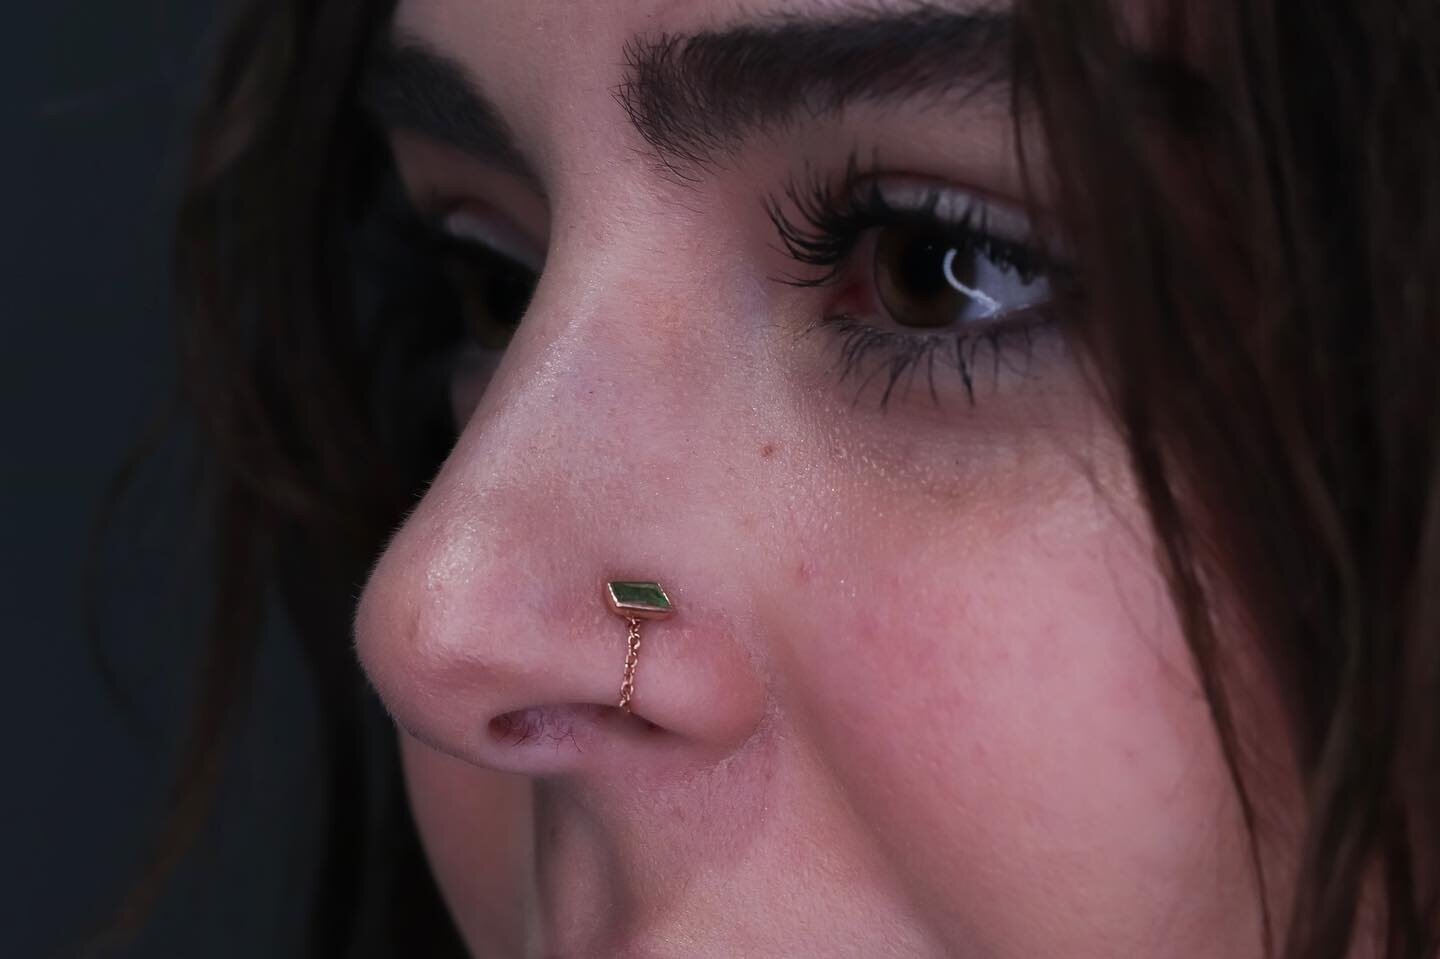 #Repost @raechelle.gabrielle​
---​
🍃🌱🌿💚🌿🌱🍃​
Face curations are a thing as well! I am in love with this concept that we put together! I used a mettleandsilver tsavorite in rose gold with a hialeahfinejewelry chain to complete the concept. ​
​
I